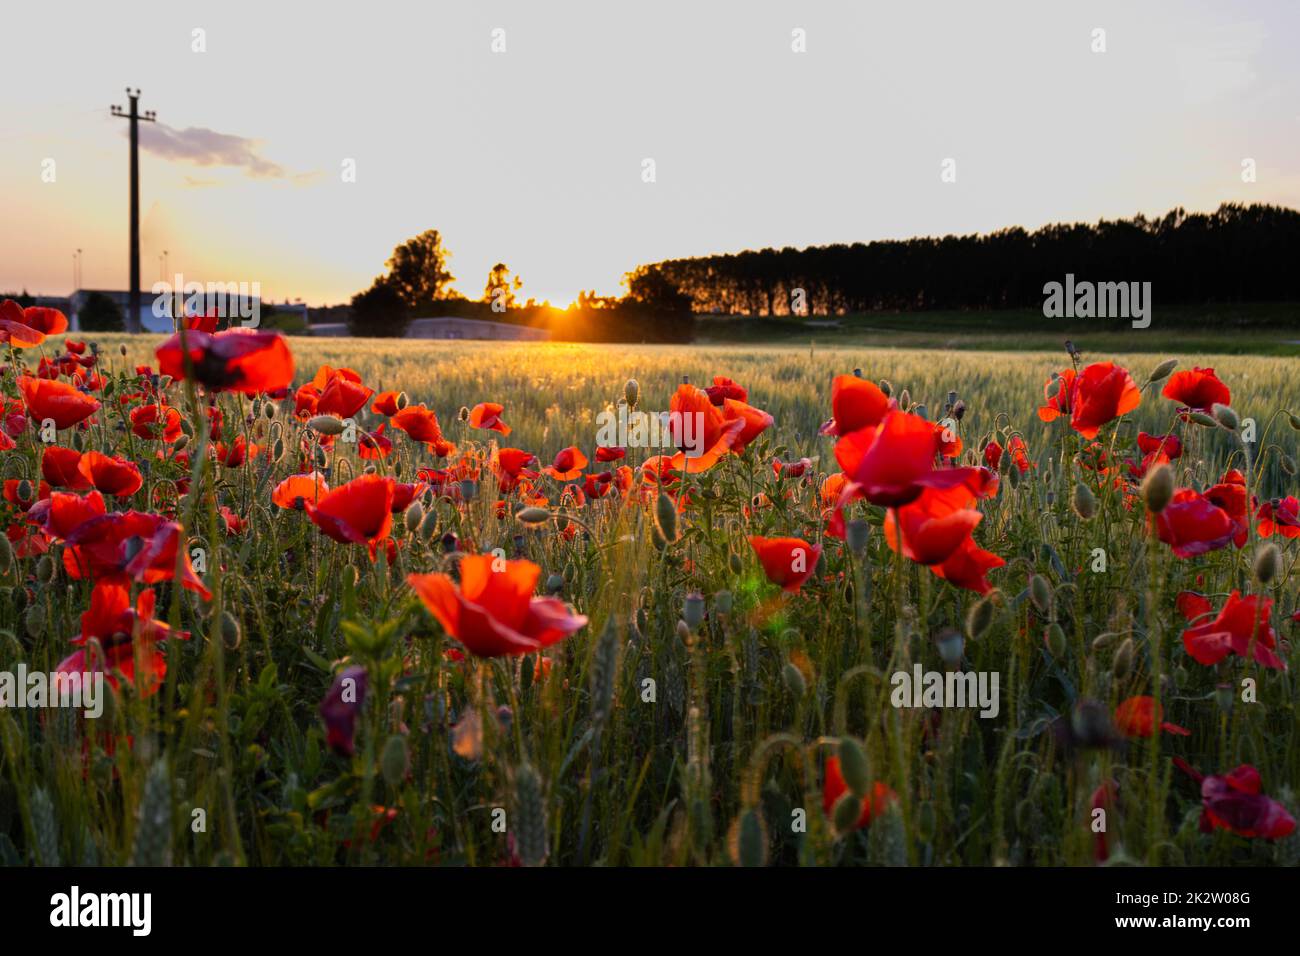 Crop field with poppy flowers in spring. Stock Photo